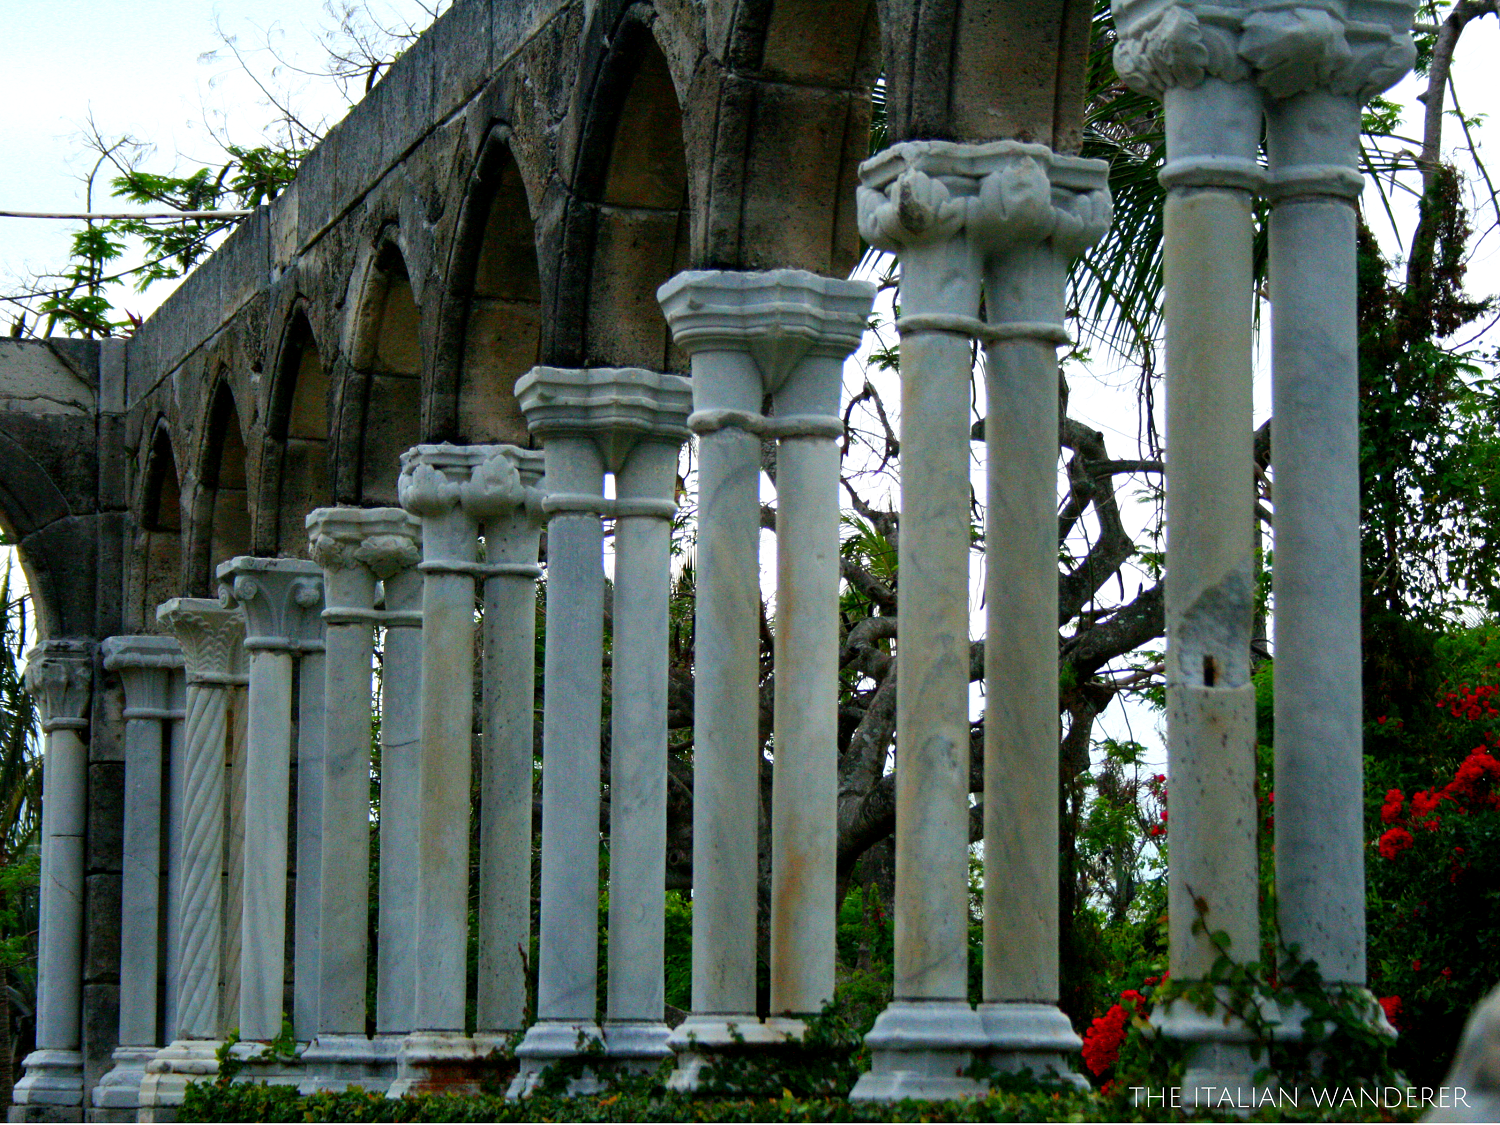 Details of the colonnades of the French Cloister at Paradise Island